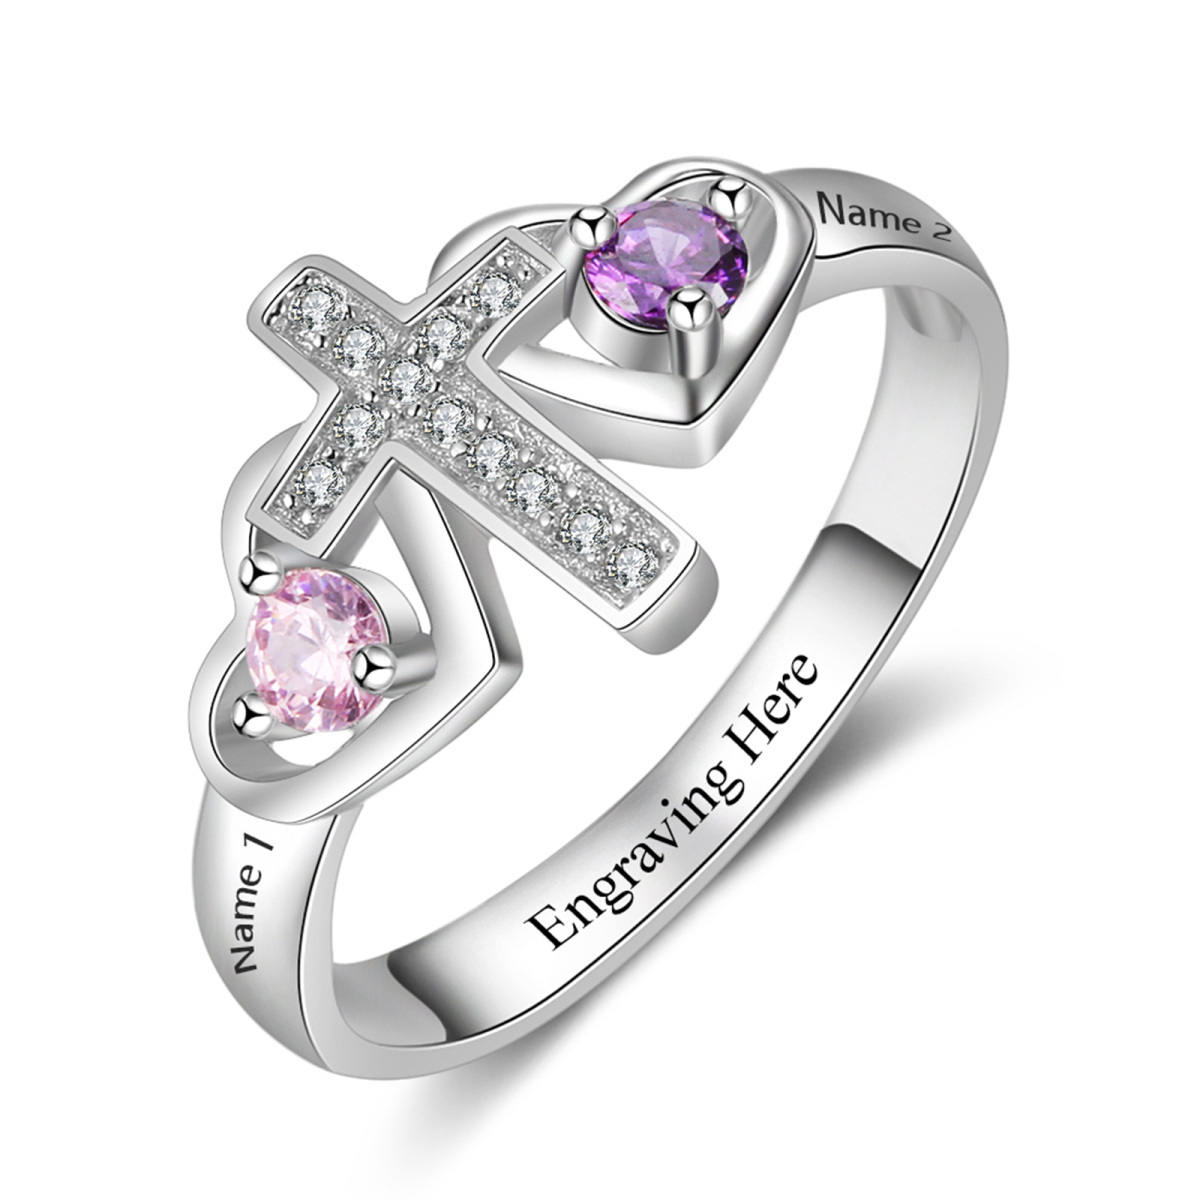 10K White Gold Cross Heart Cubic Zirconia Personalized Engraving & Birthstone Ring-1